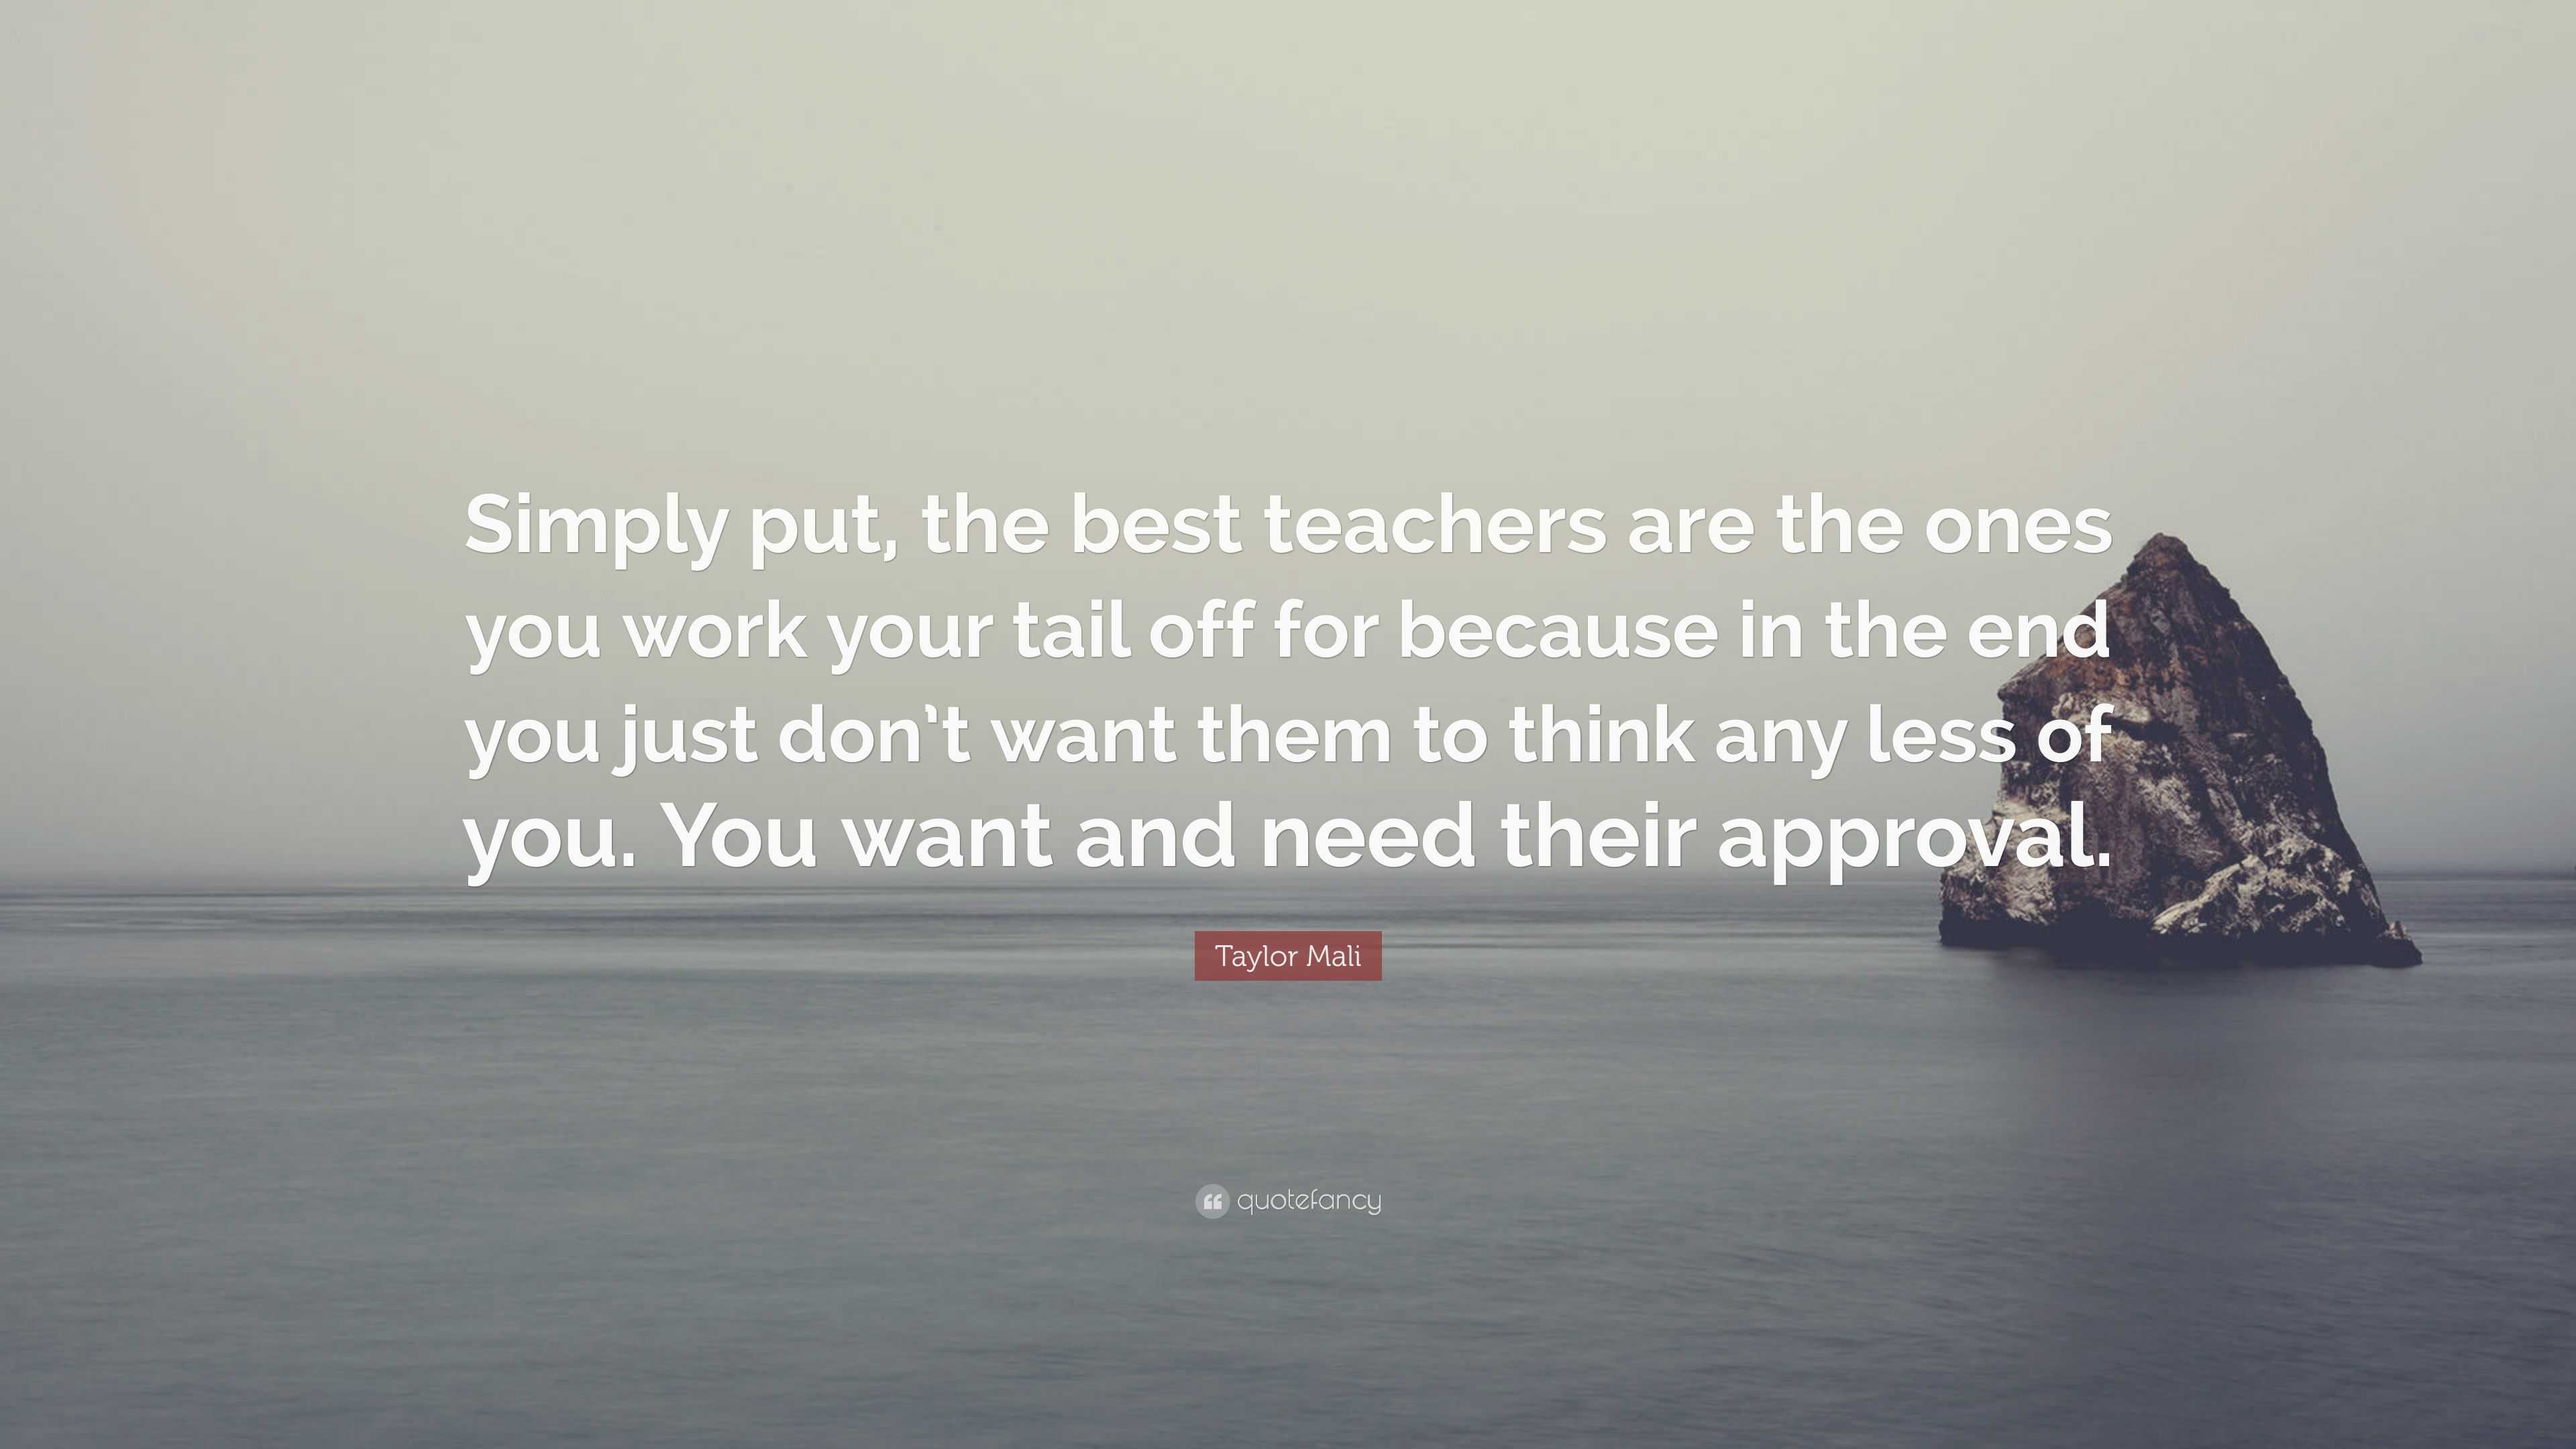 Taylor Mali Quote: “Simply put, the best teachers are the ones you work ...